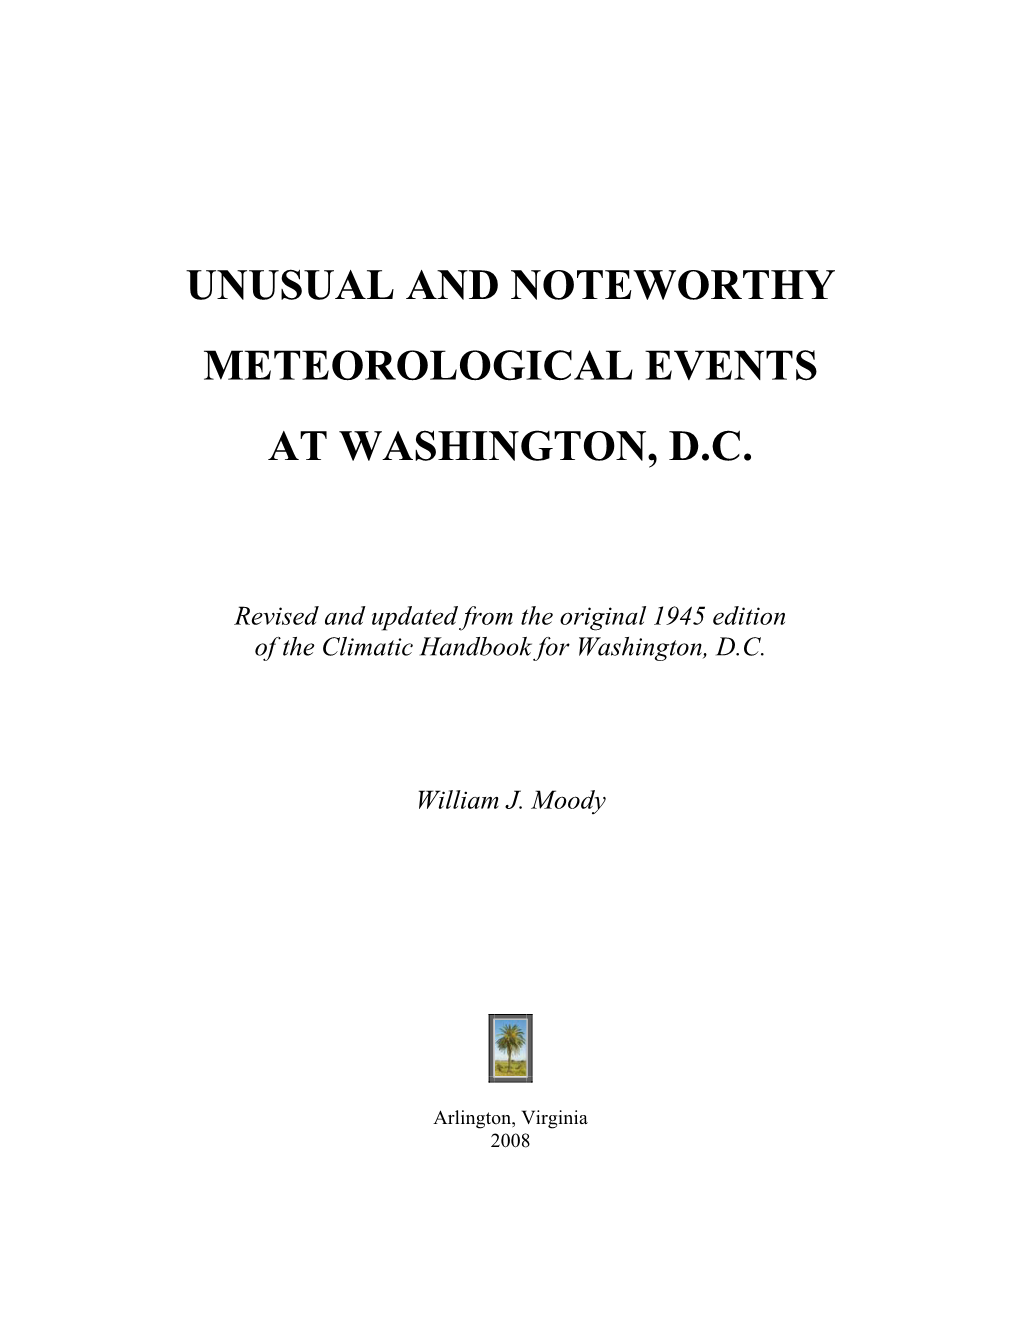 Unusual and Noteworthy Meteorological Events at Washington, D.C